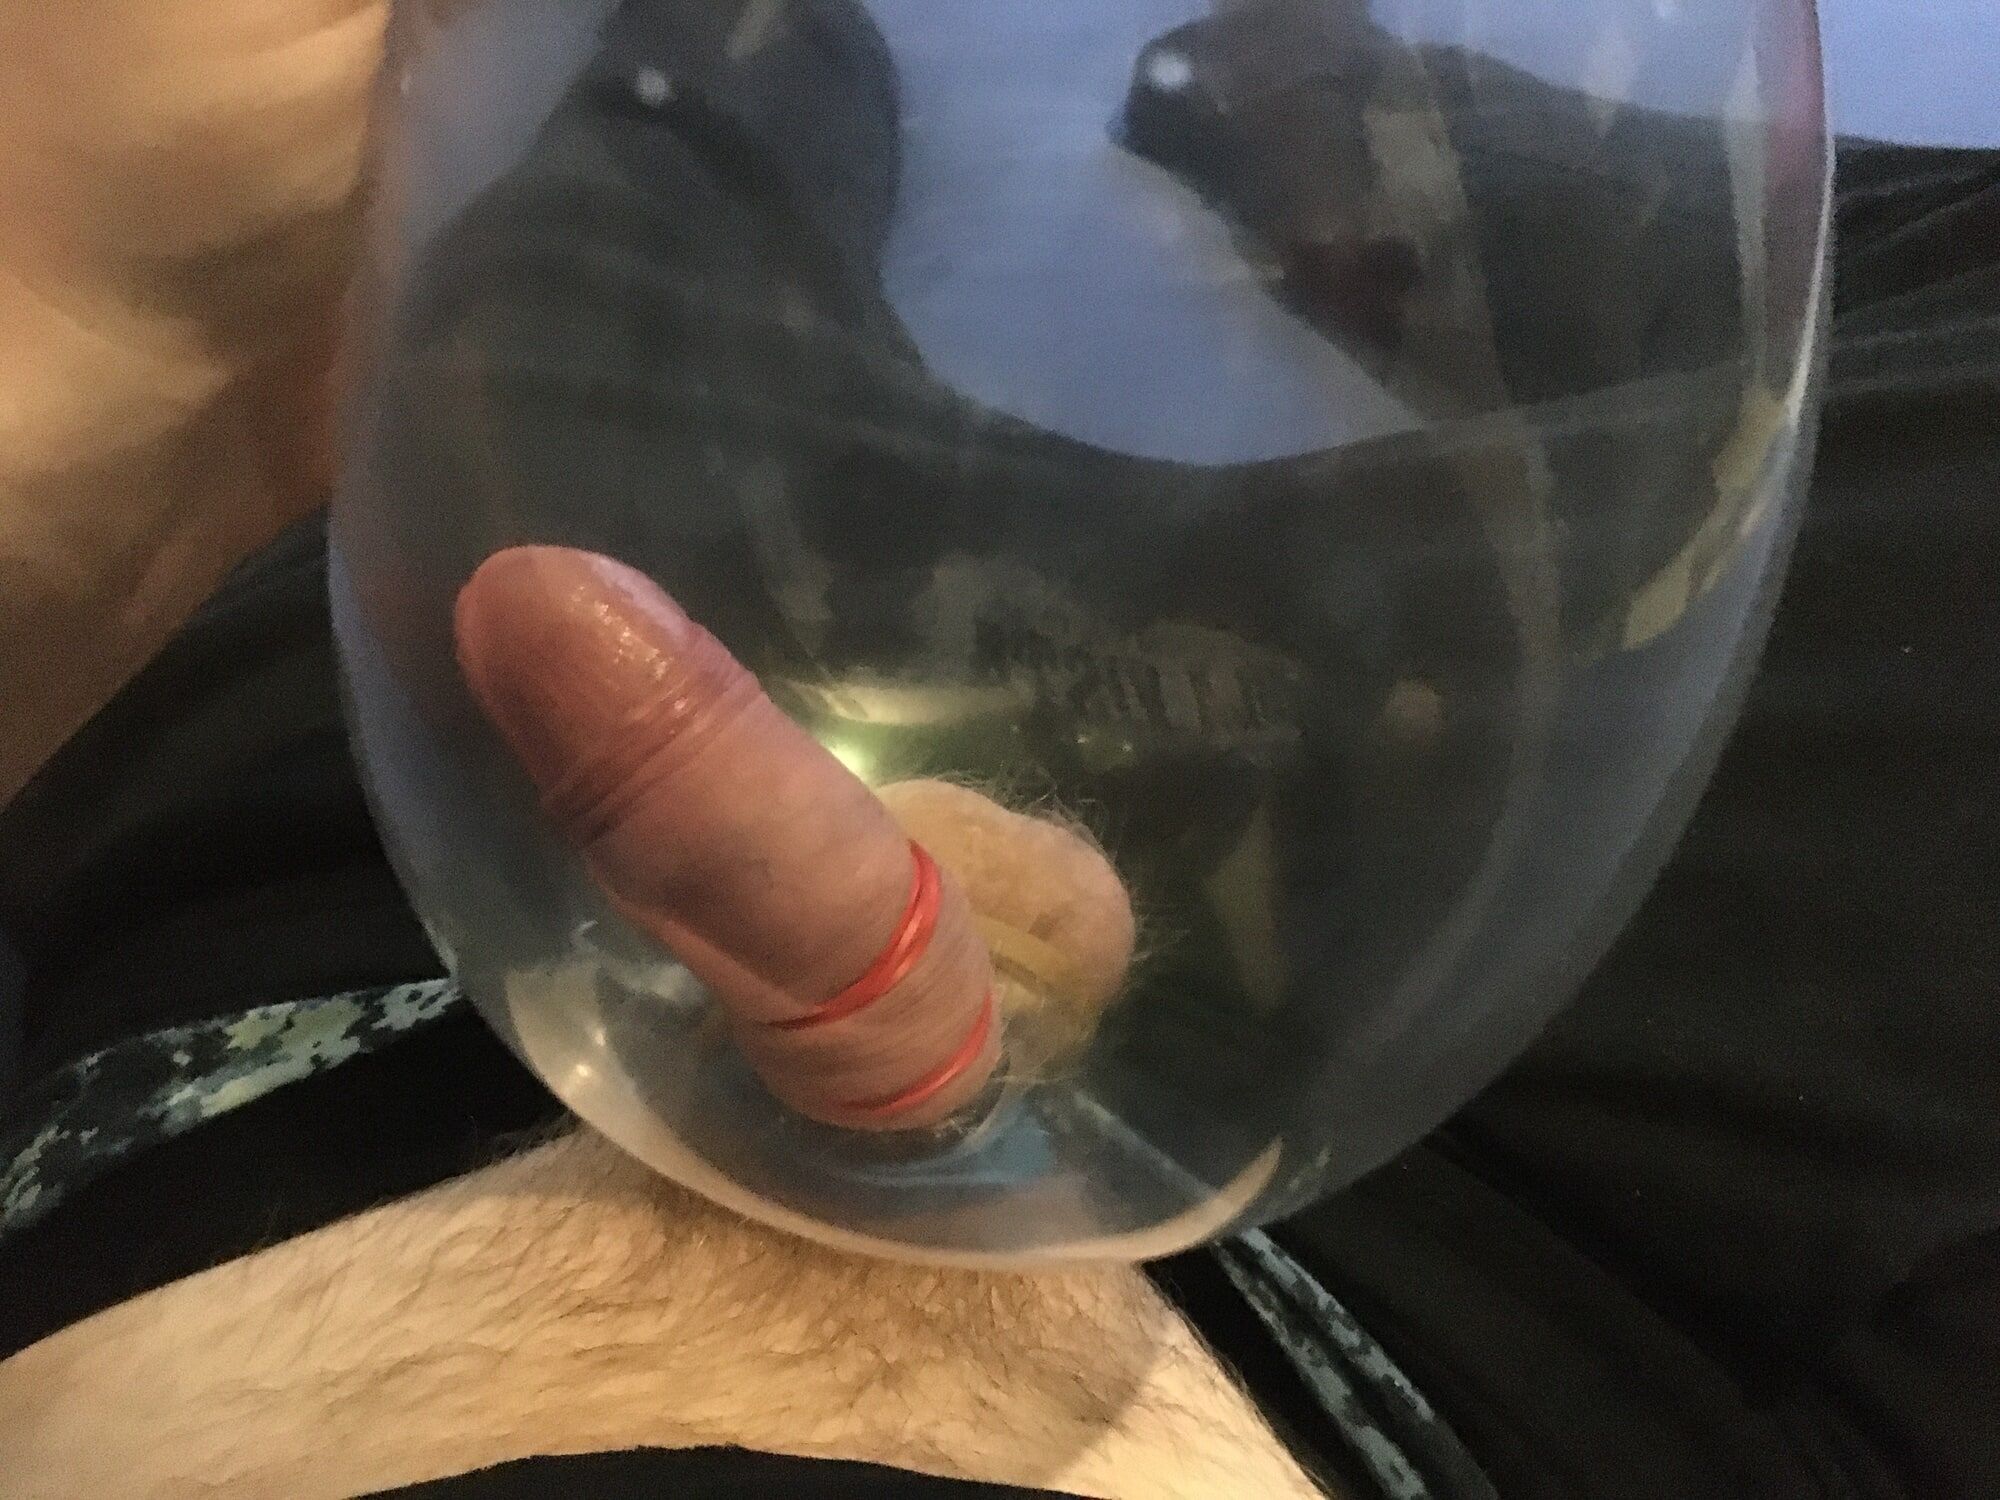  Haired Dick And Balls With Rubber Bands Condom Ballon  fuck